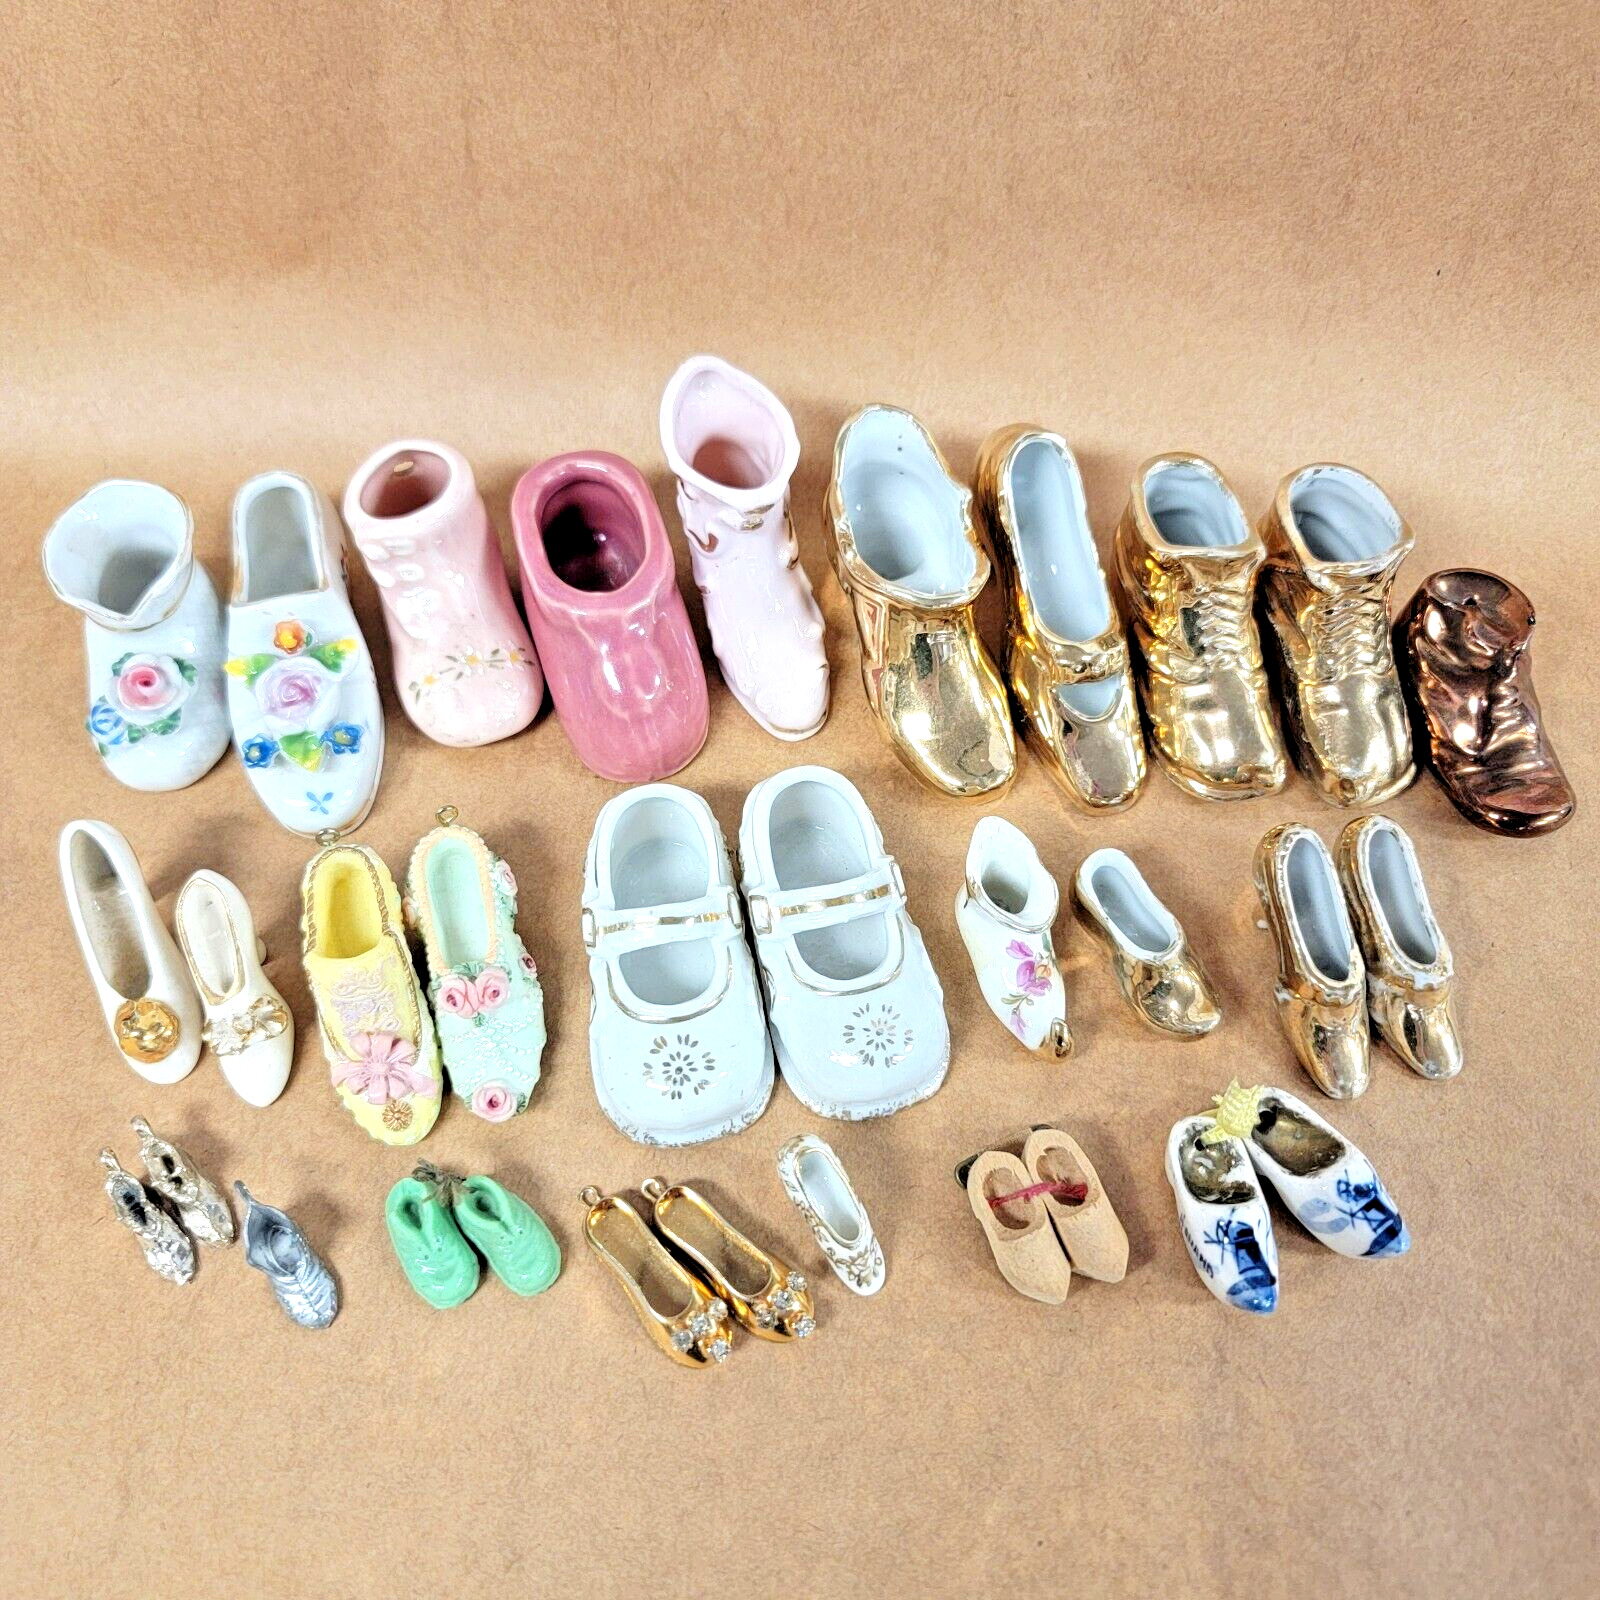 Vintage Miniature Shoe Lot of 32 Pc Mixed Ceramic Porcelain Wood Resin and Metal